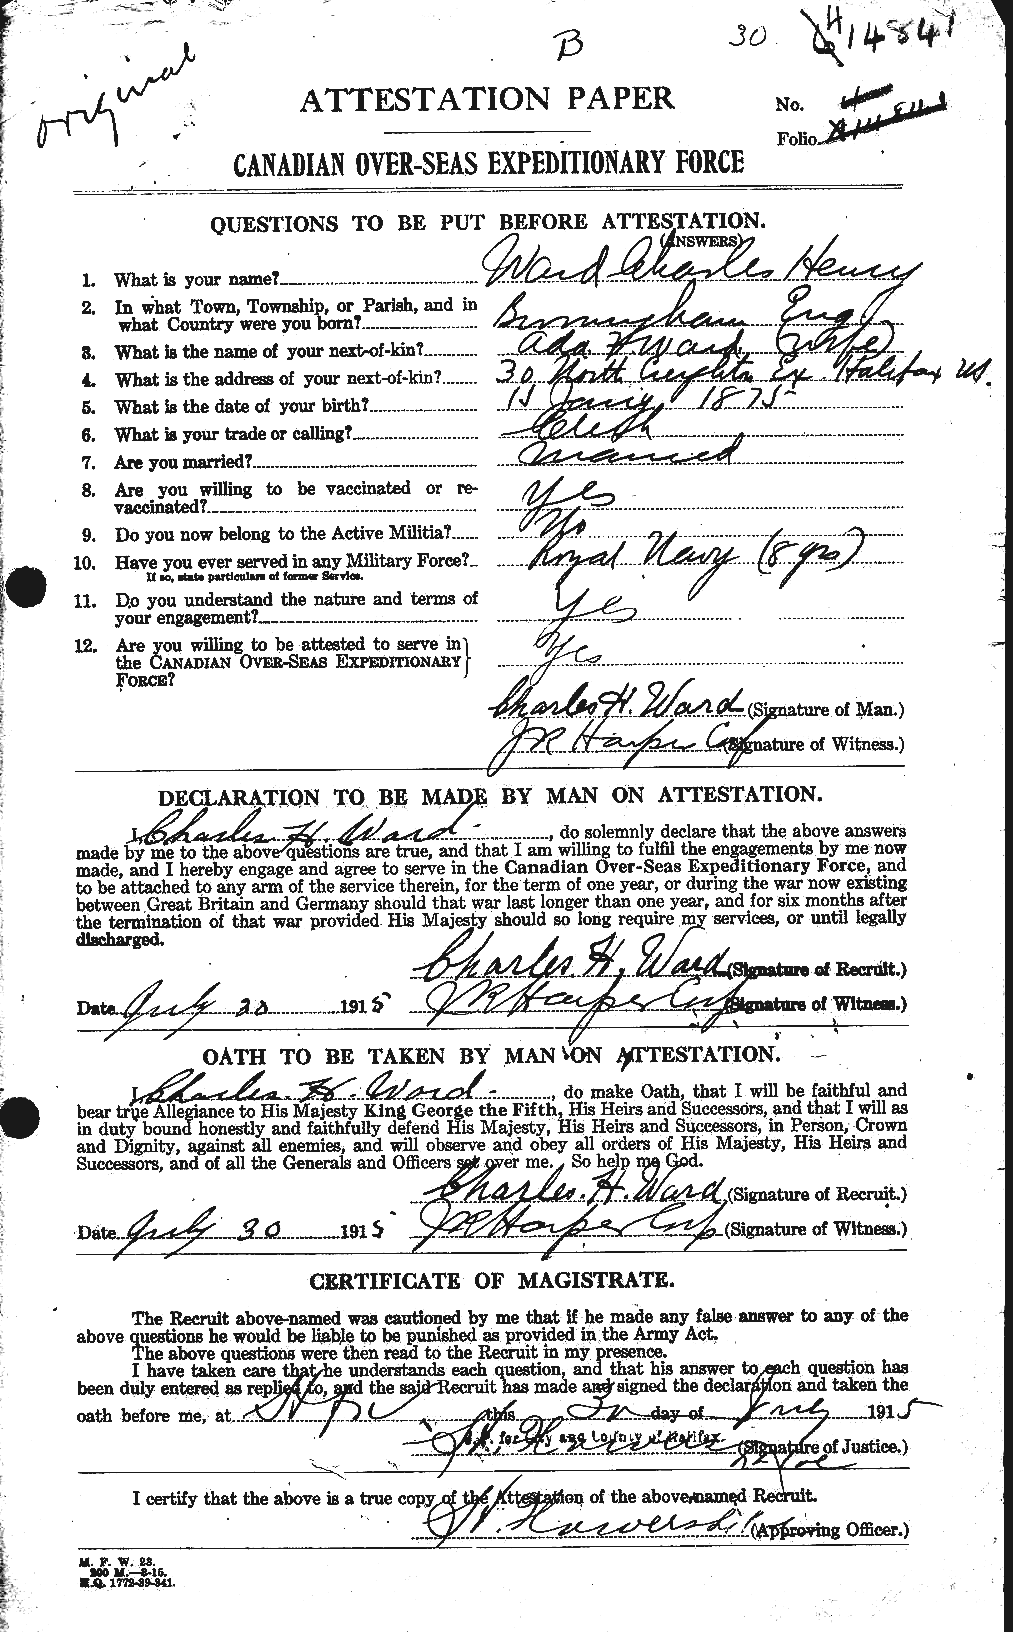 Personnel Records of the First World War - CEF 657582a